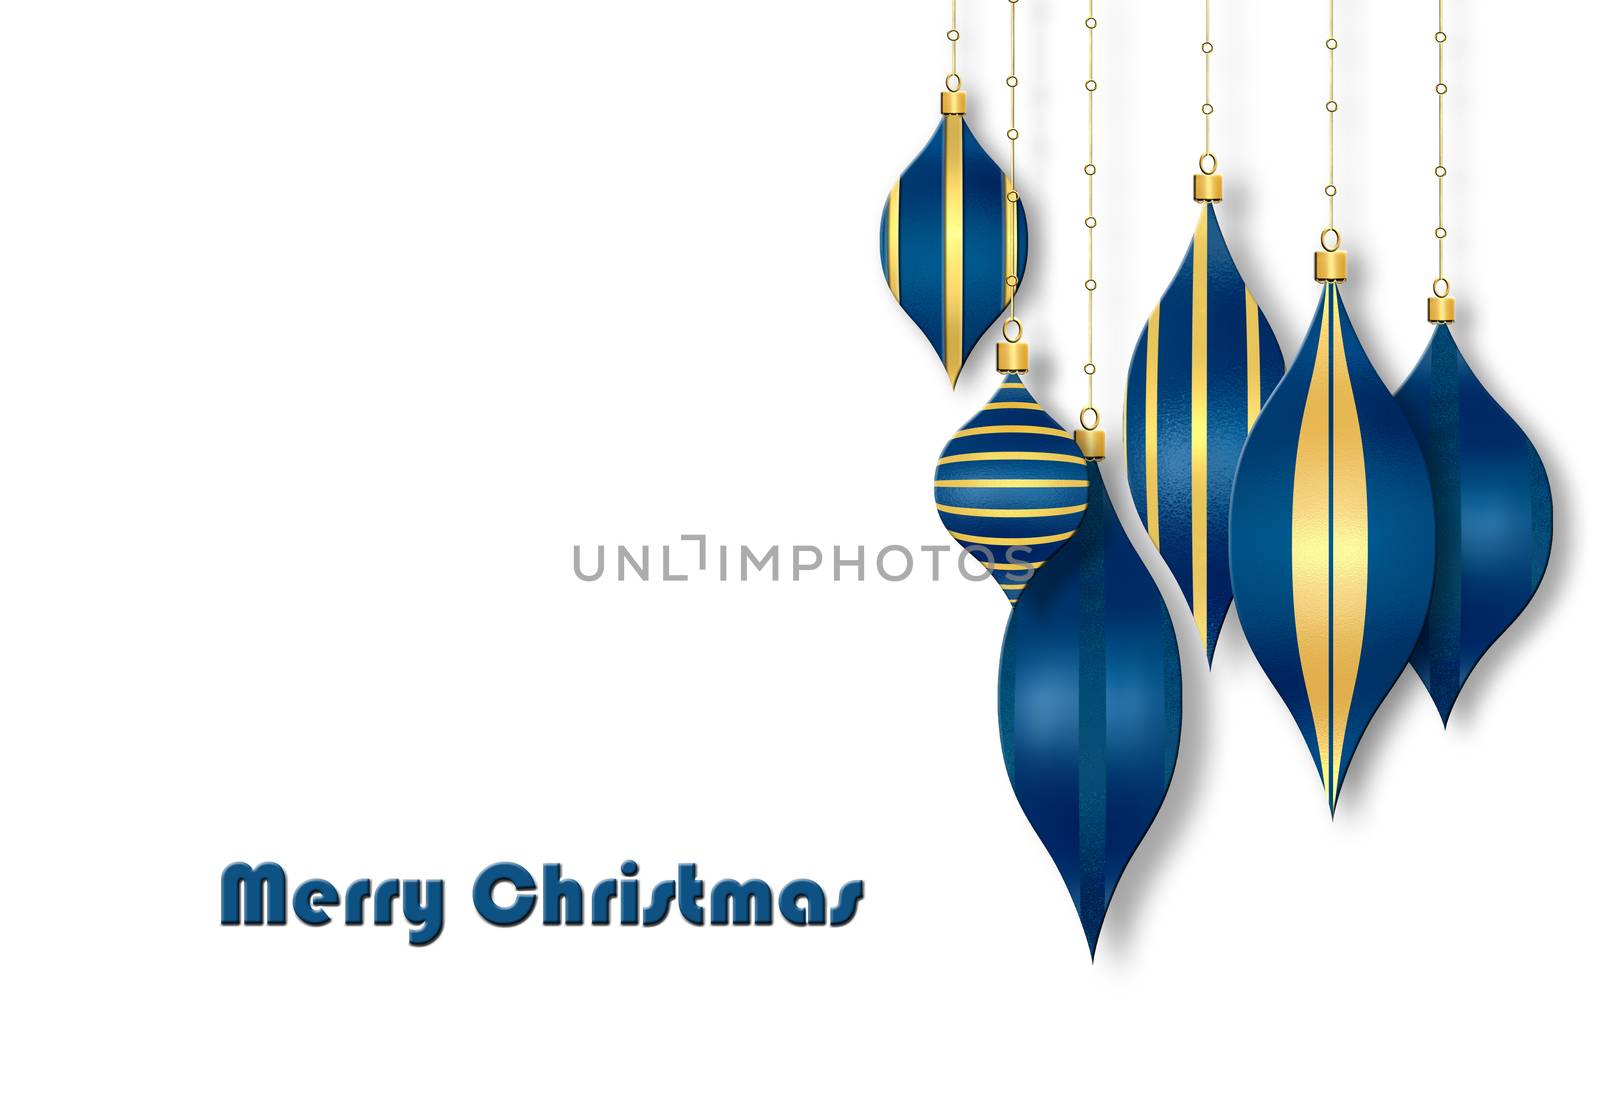 Christmas 3D illustration on white background. Text Merry Christmas, blue baubles and balls with gold ornament.